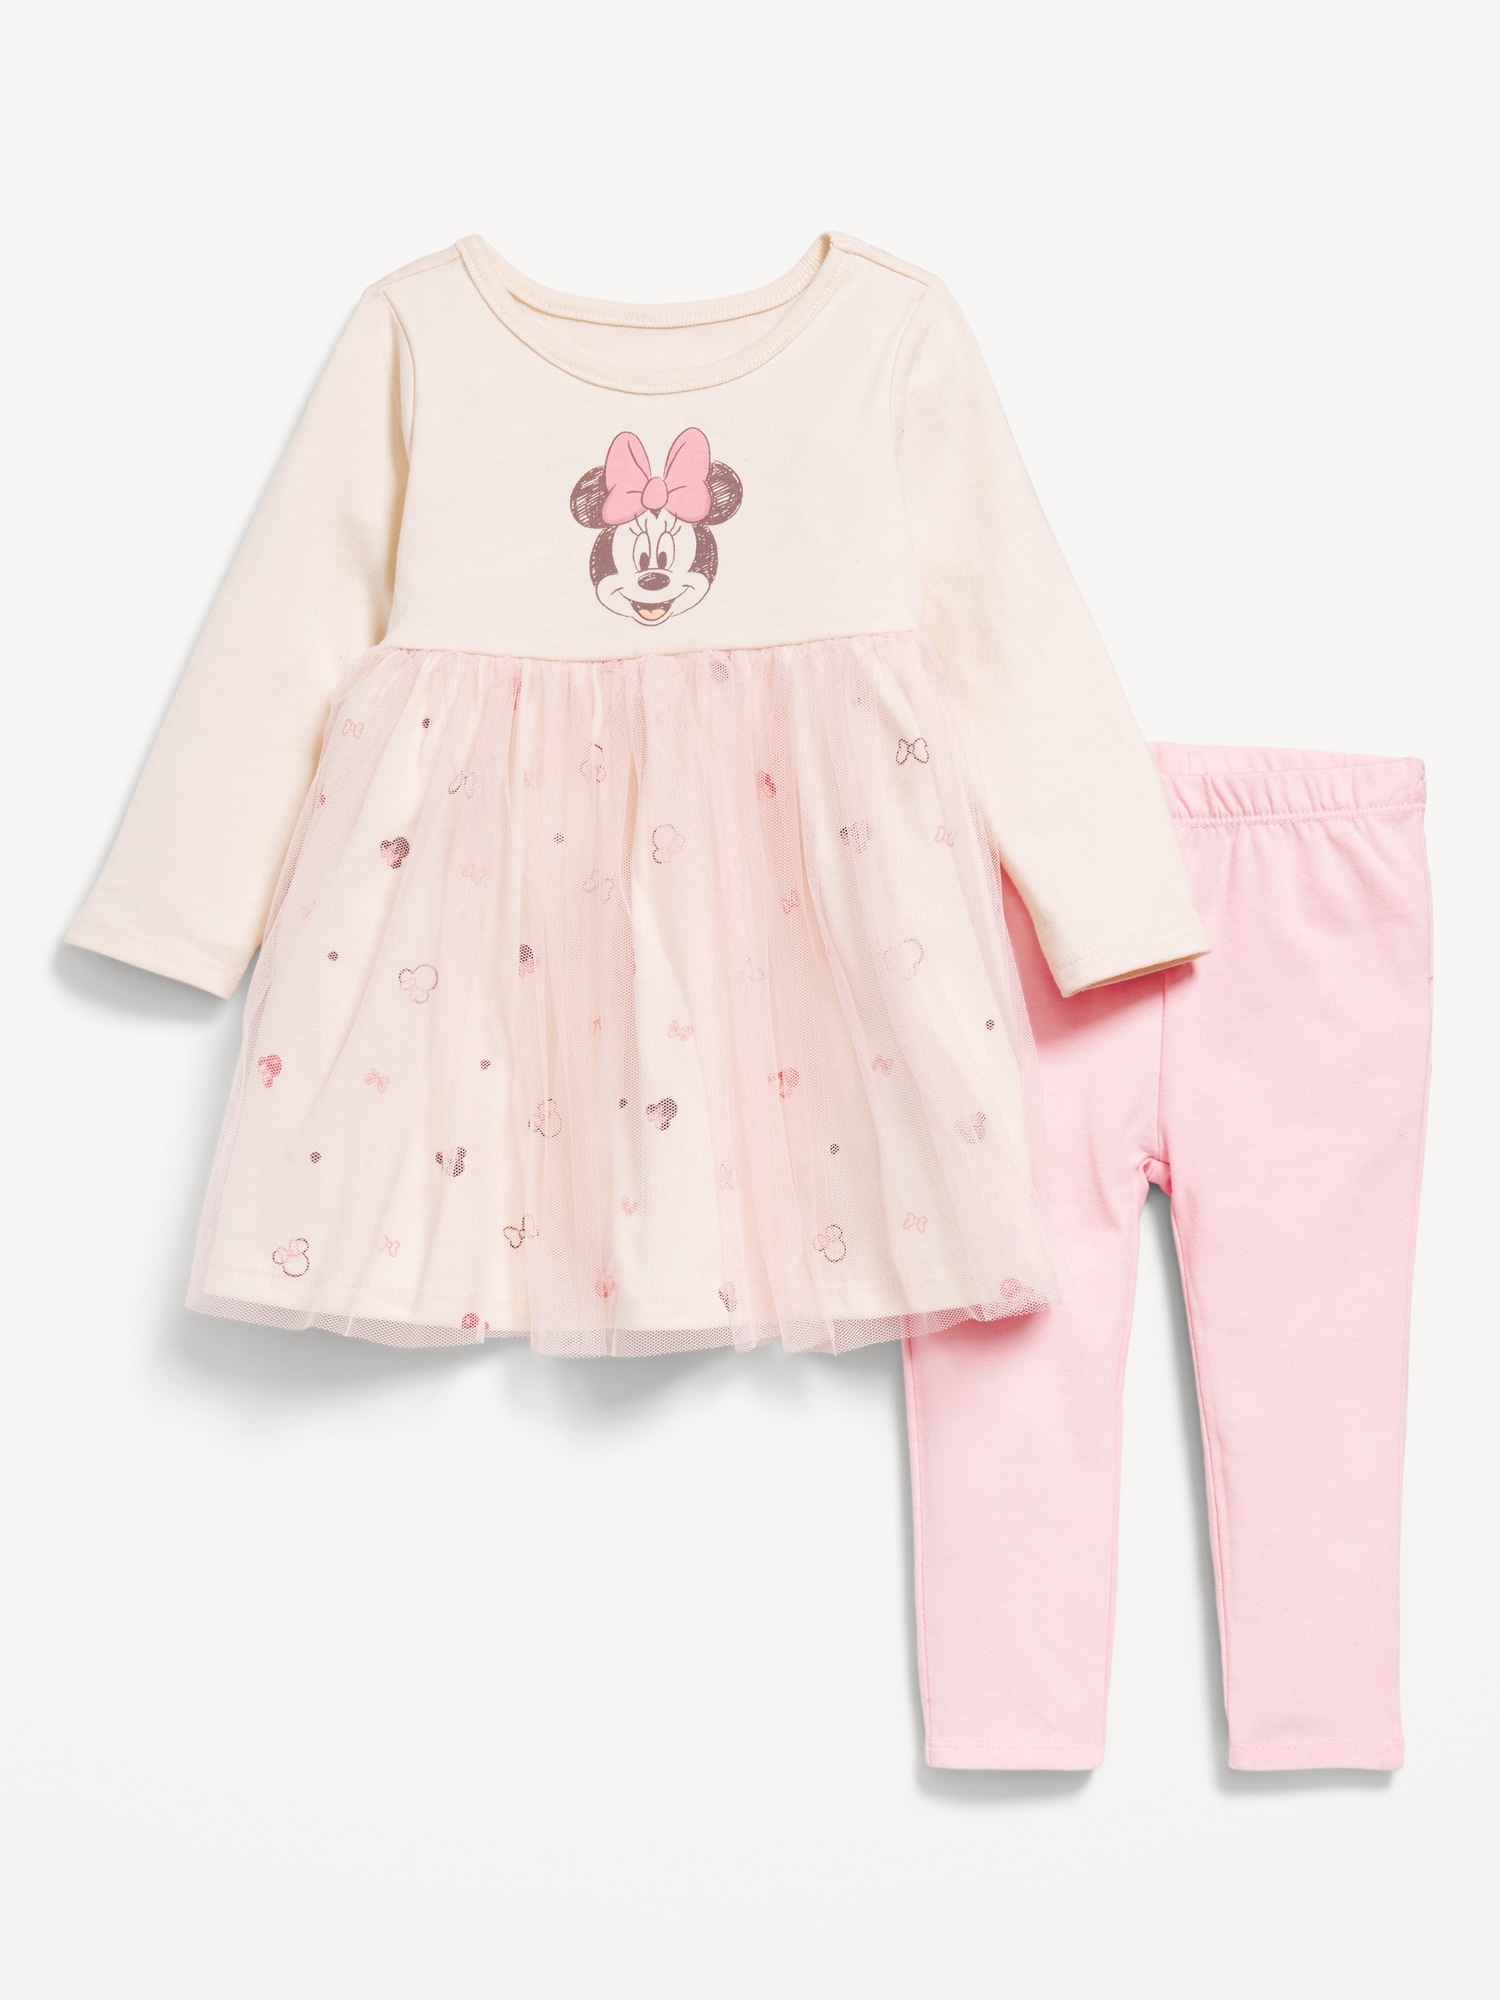 Disney© Minnie Mouse Dress and Leggings Set for Baby